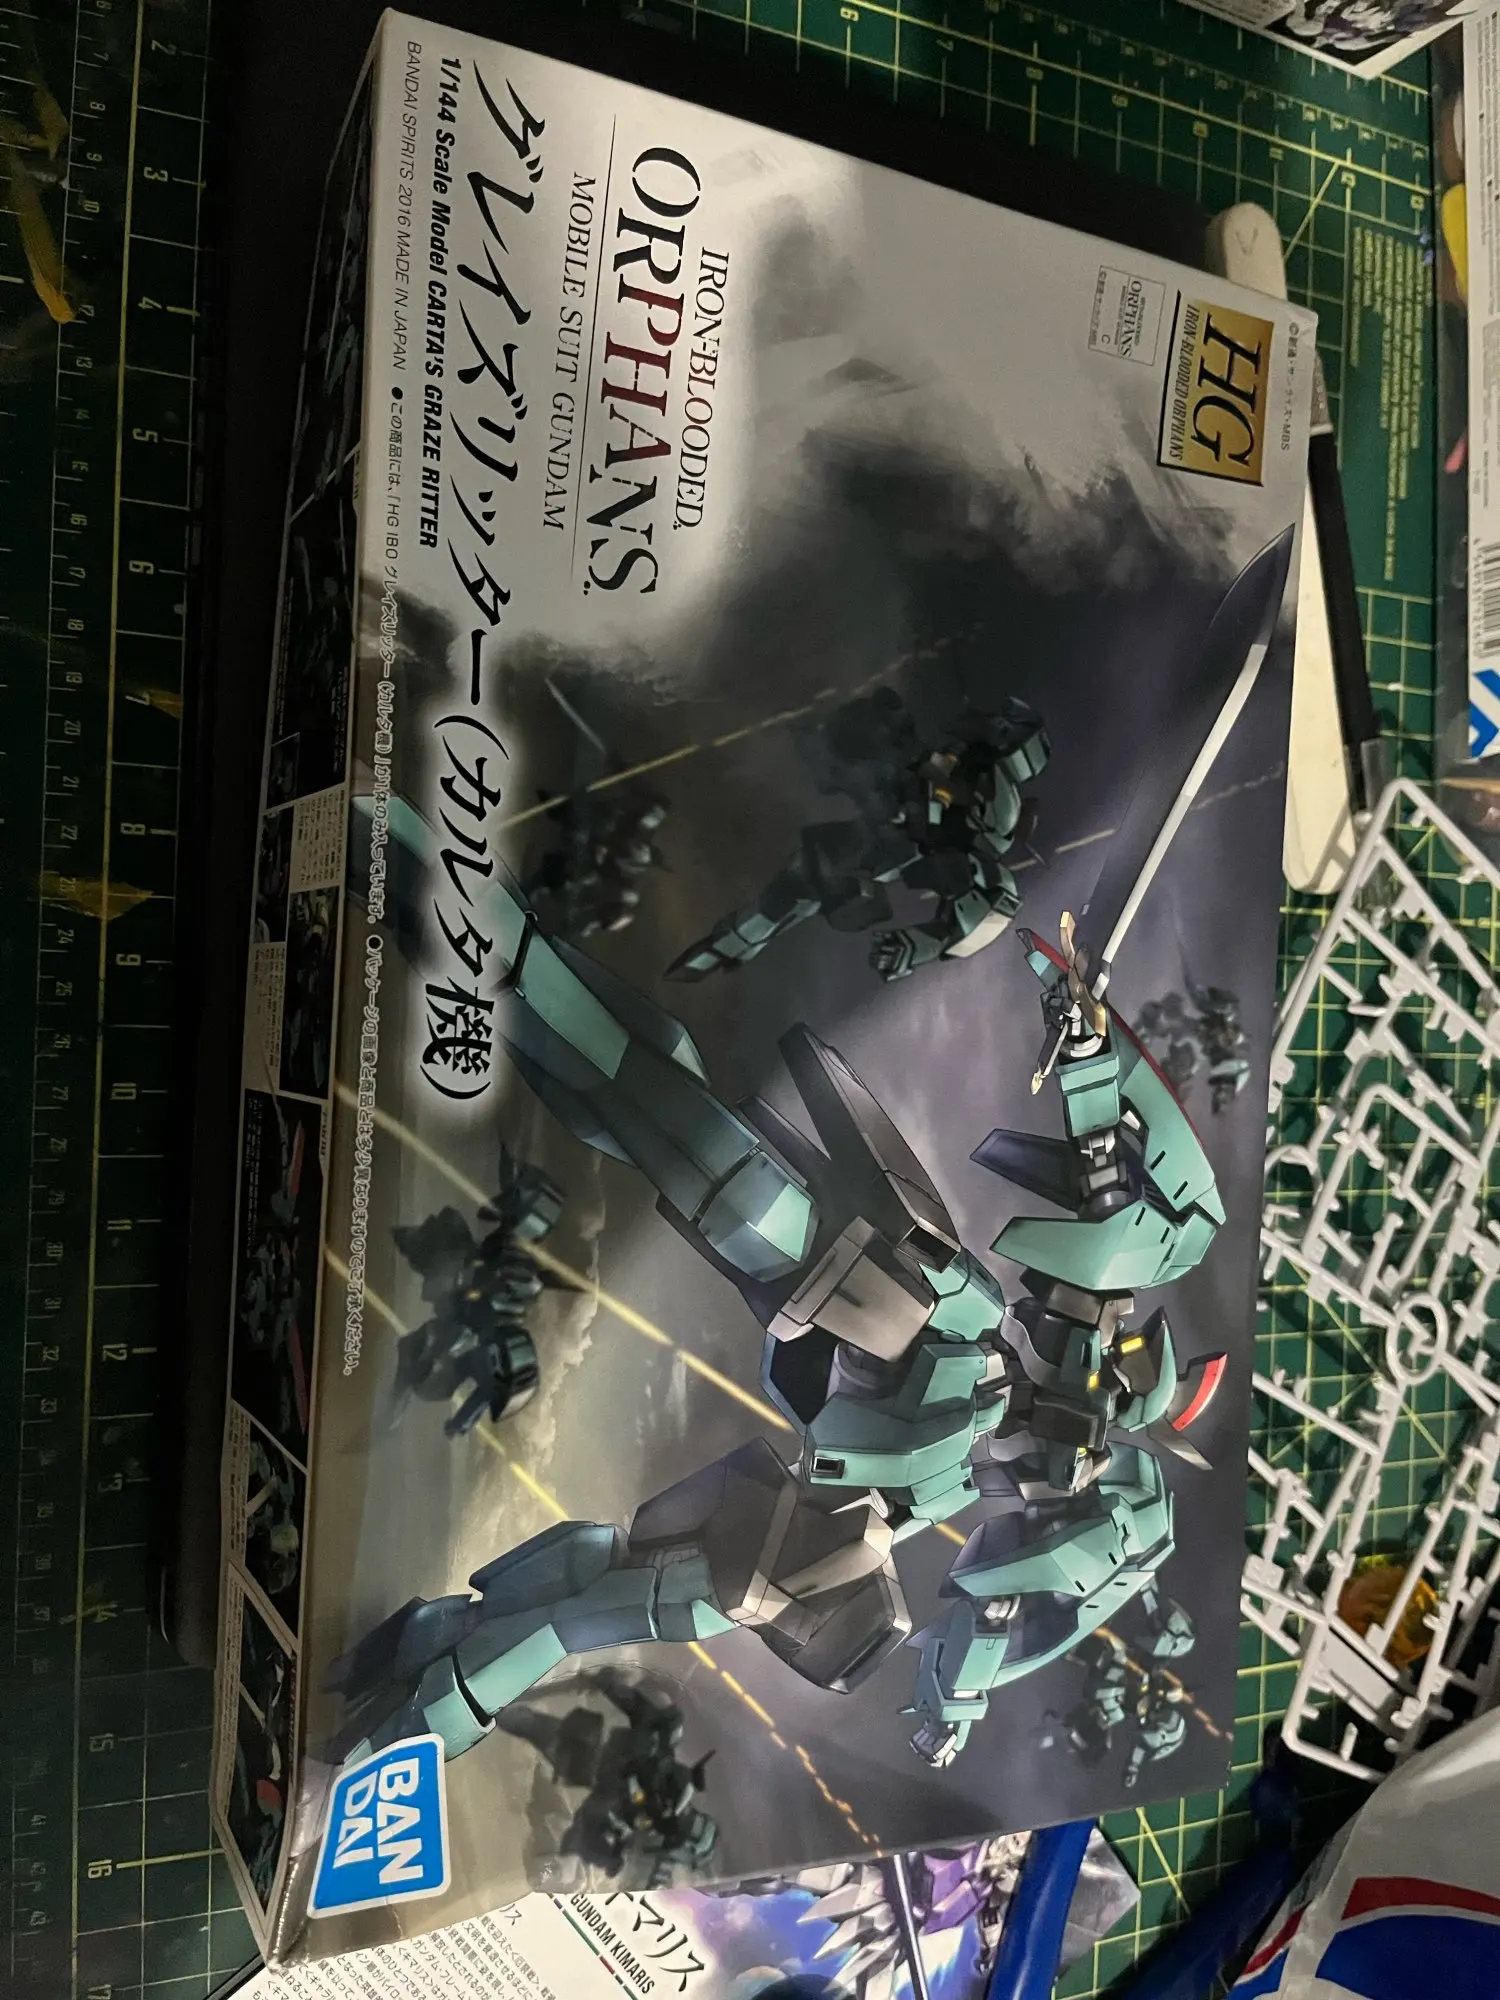 Bandai Original Gundam Kit Anime Figure HG 1/144 SCALE MODEL CARTA'S GRAZE RITTER Action Figures Collectible Toys Gifts for Kids photo review